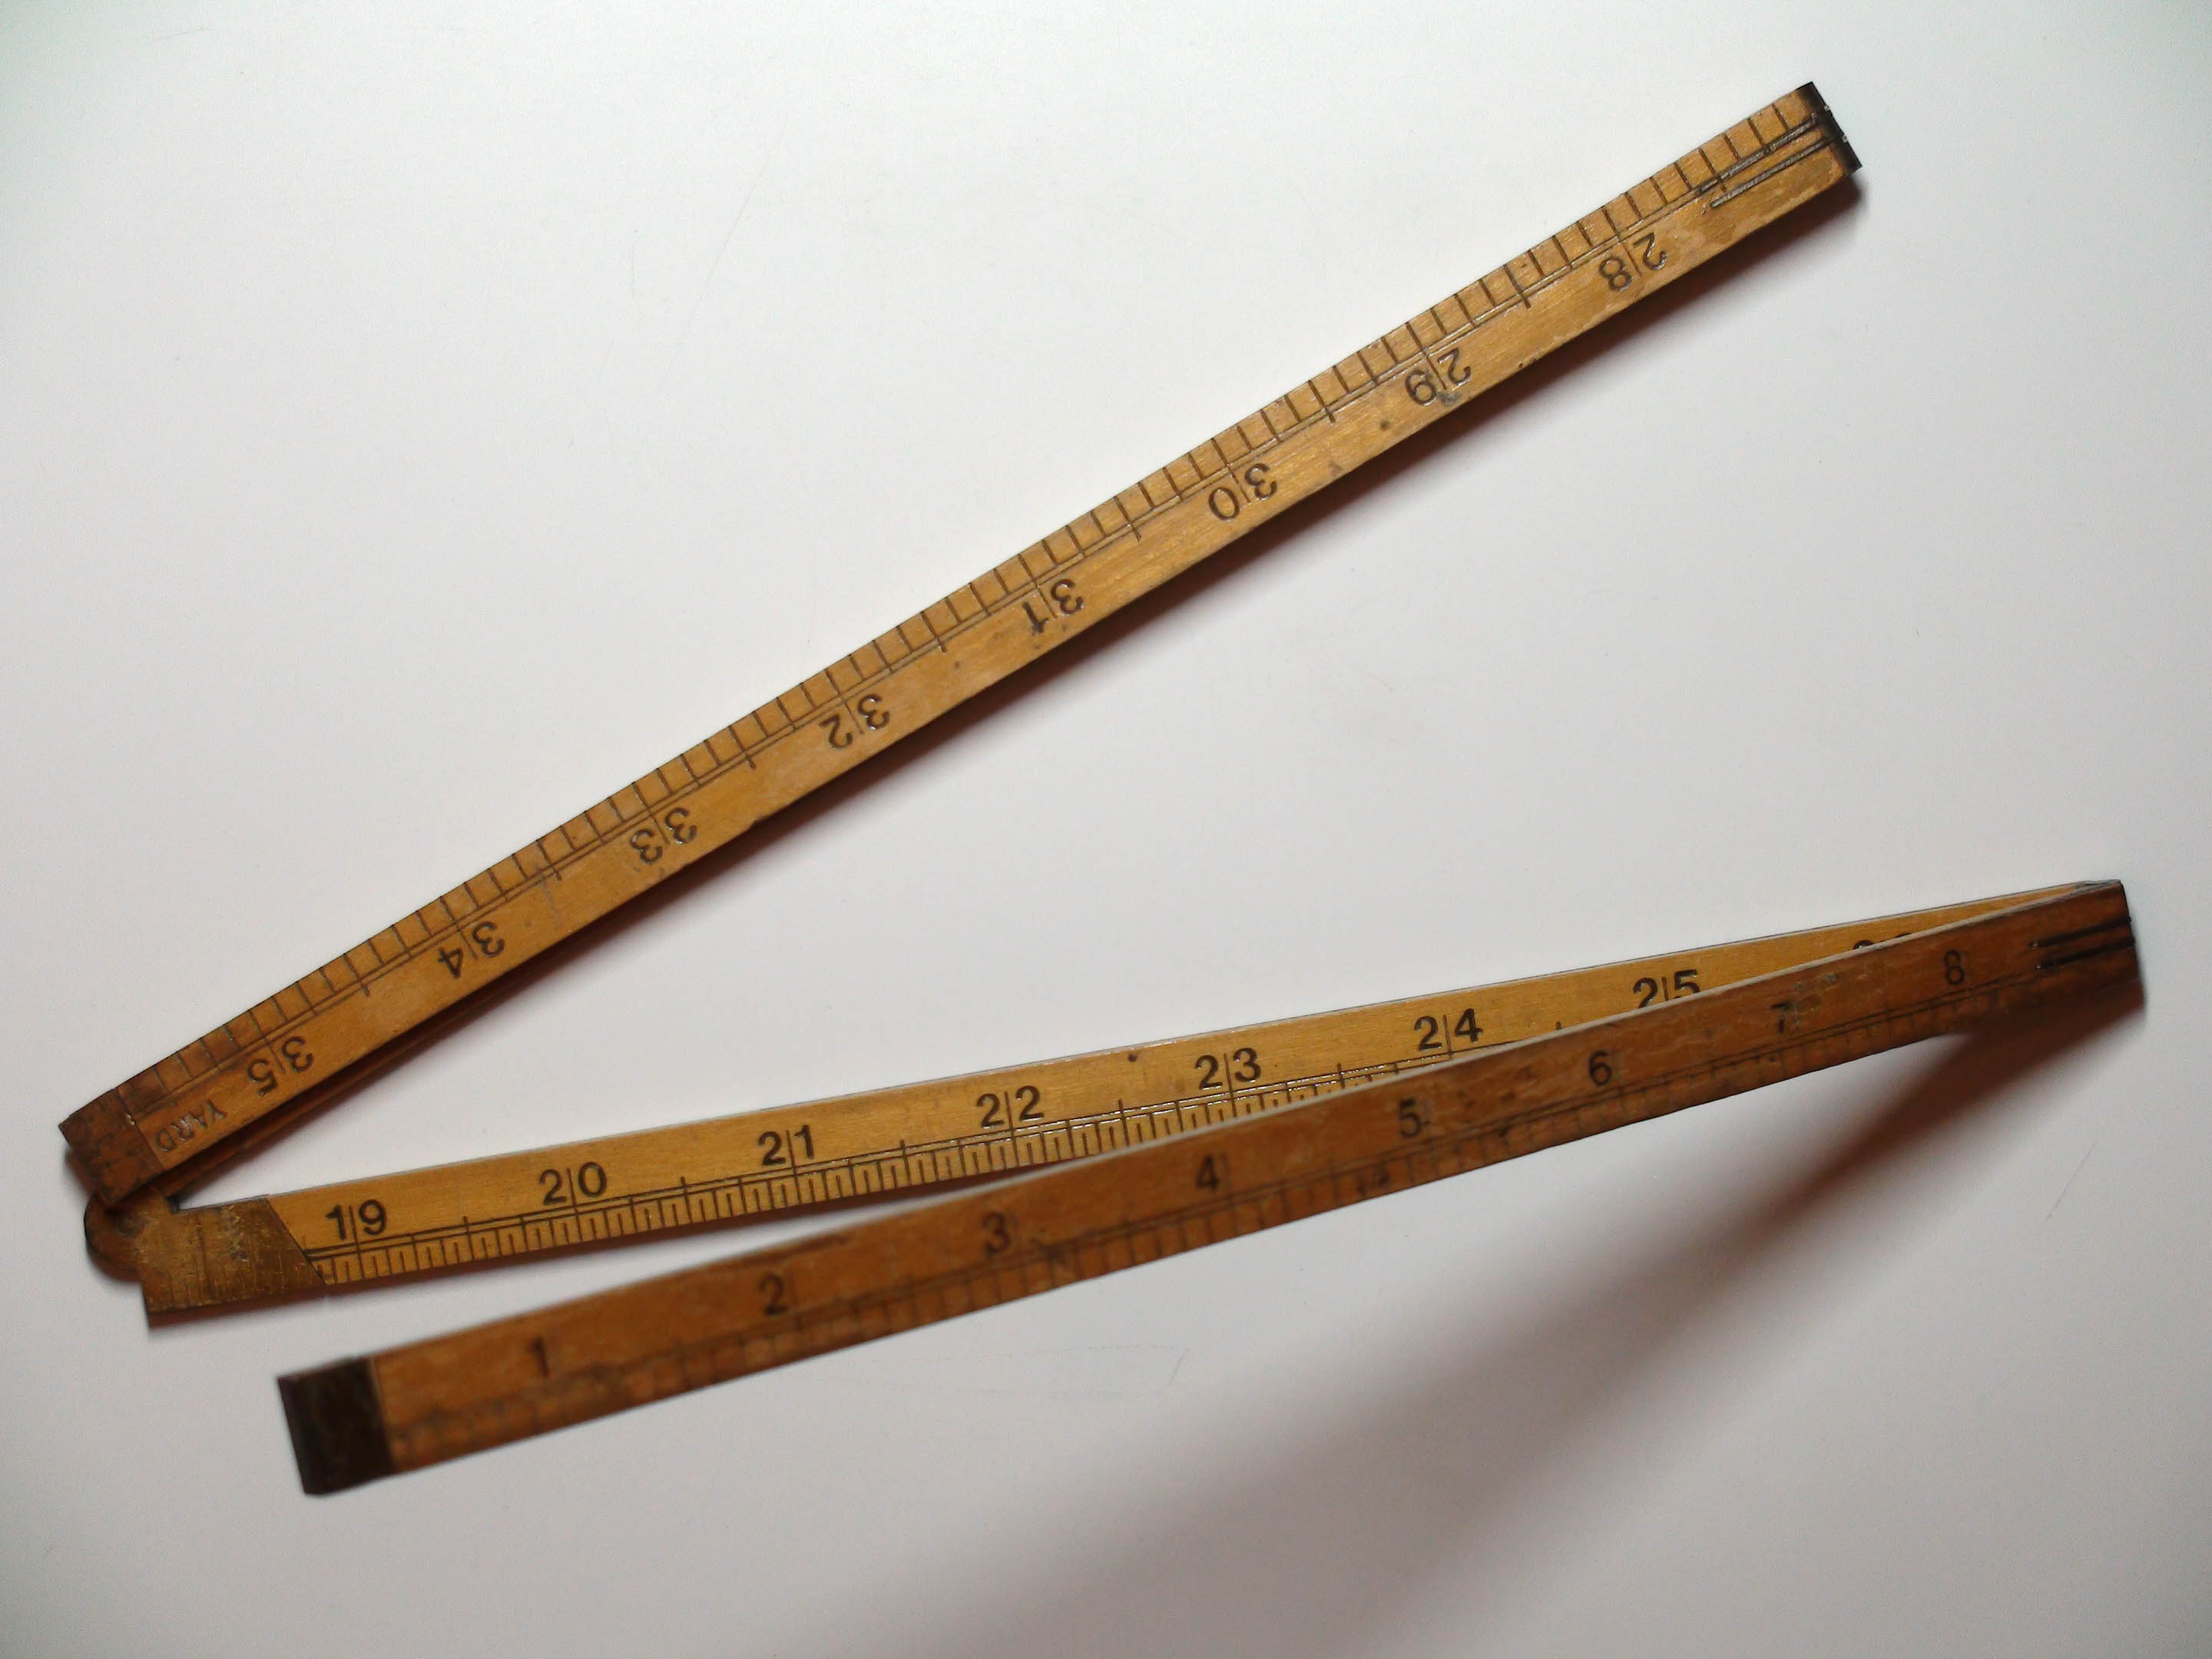 Vintage Lufkin No. 3851, 36in 4- Fold Carpenter Ruler, Brass and Boxwood, Made in the UK